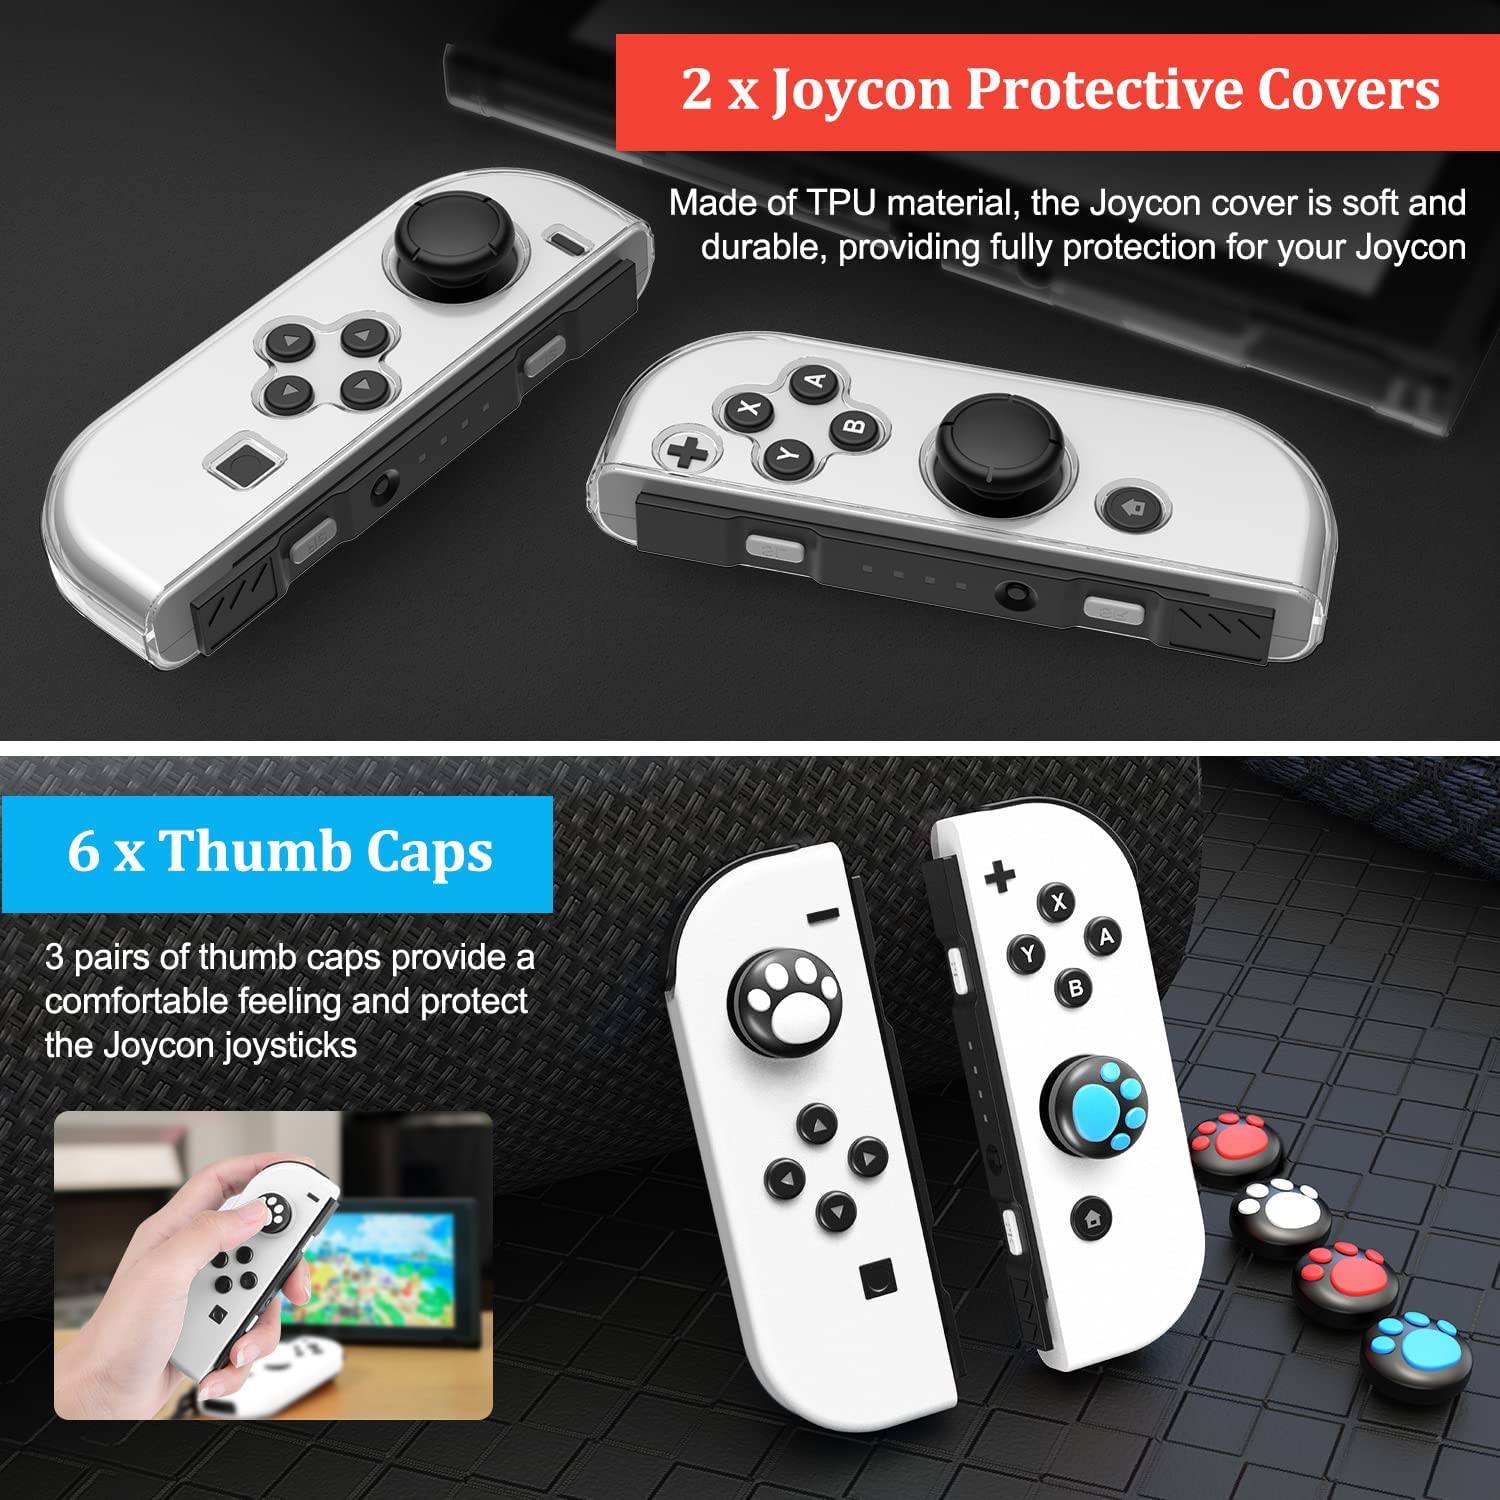 innoAura Hard Carrying Case for Switch OLED with 20 Accessories